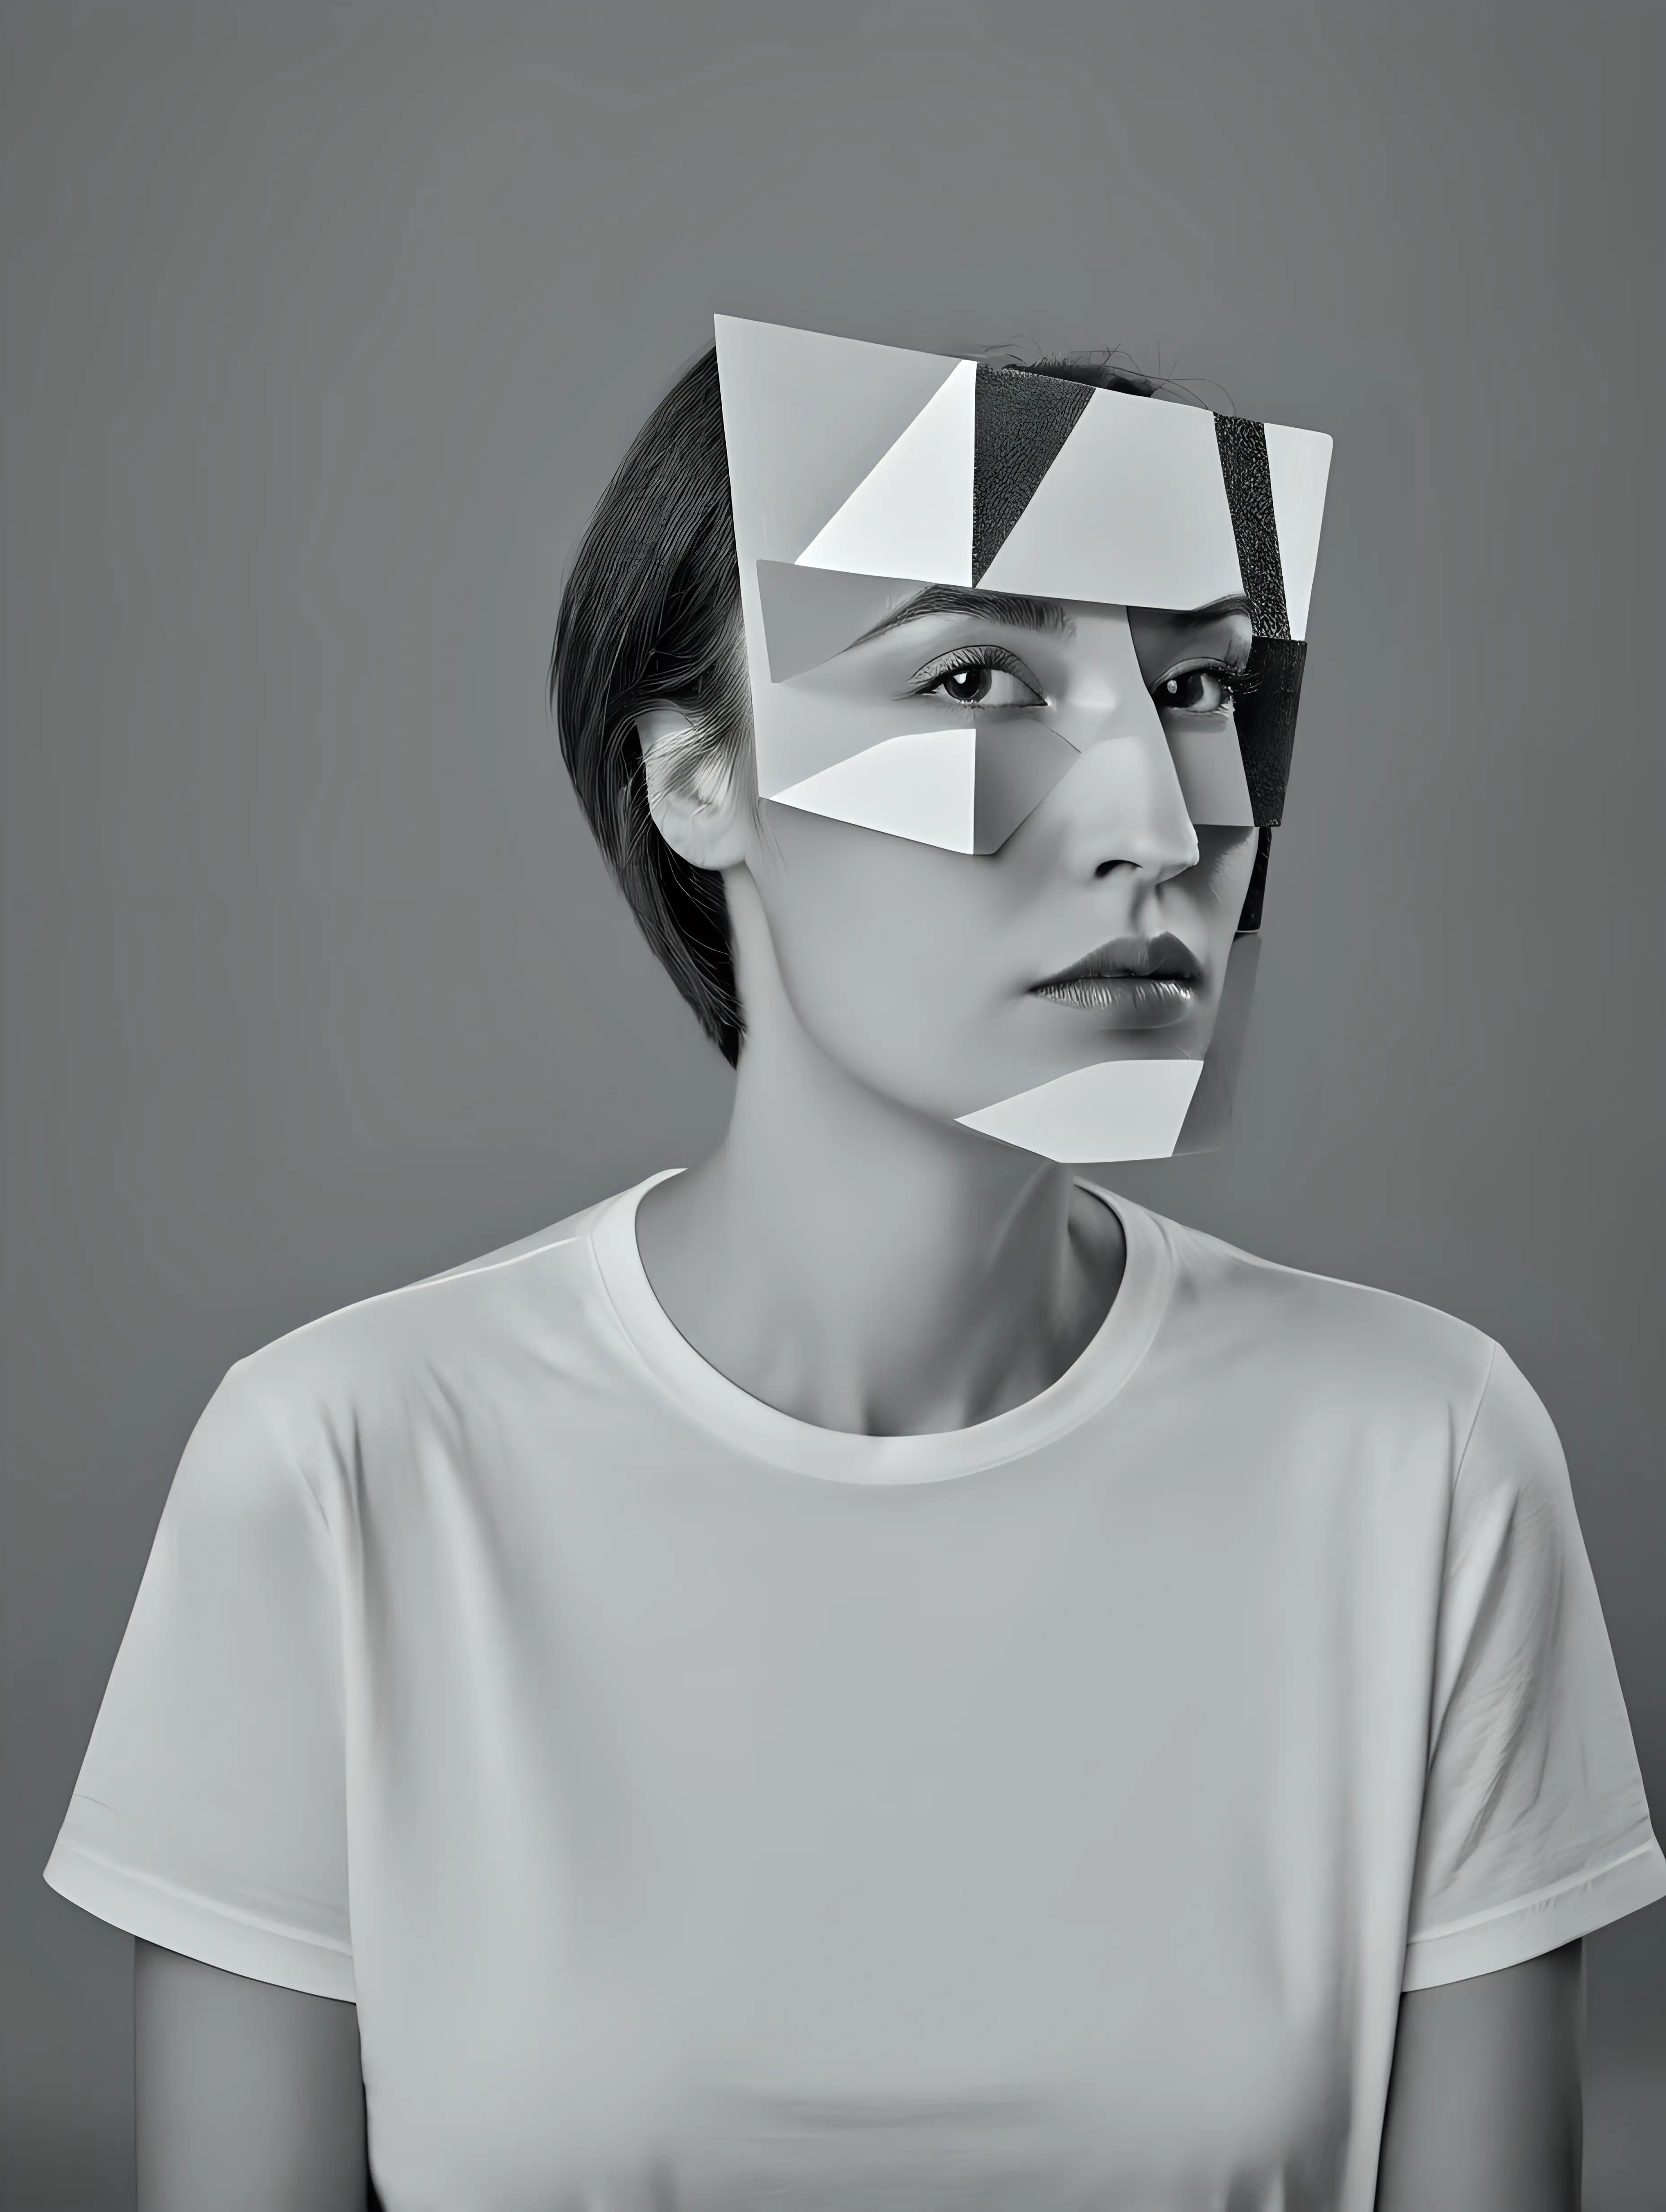 Cubist Portrait Featuring Geometric Abstraction and Bold Colors